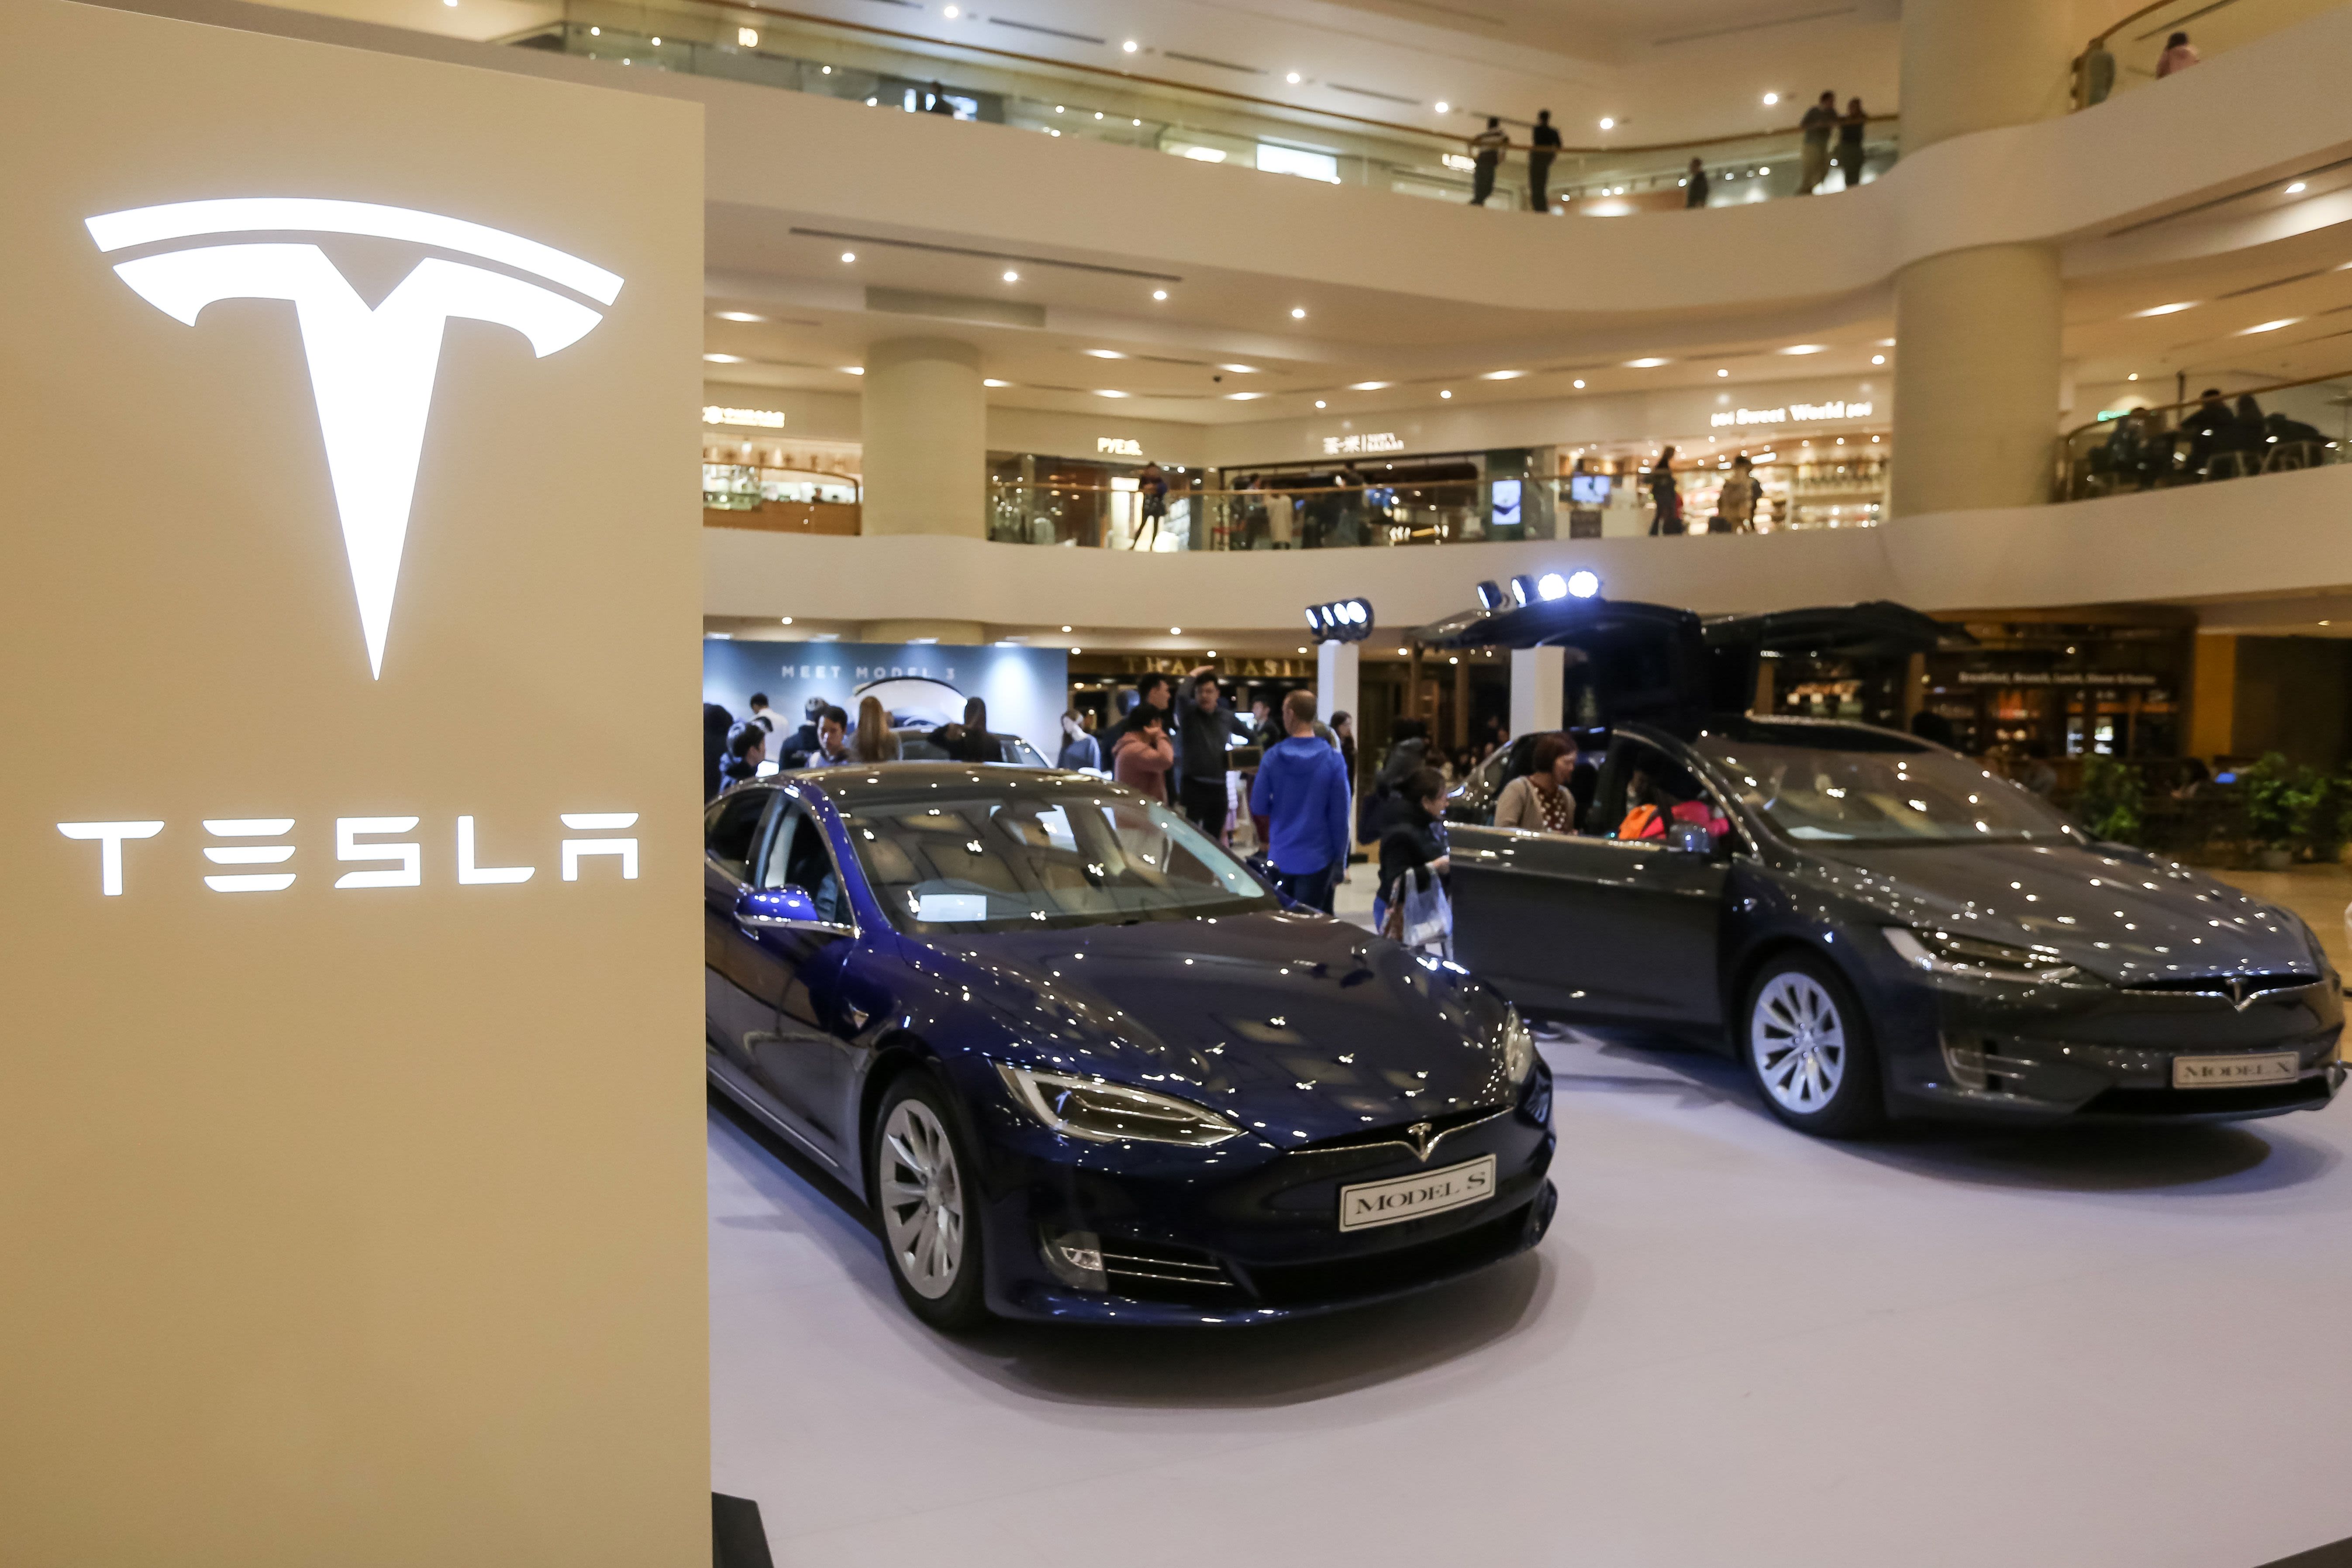 A Tesla Model S (L) and Model X are displayed at a shopping mall in Hong Kong on March 10, 2019.